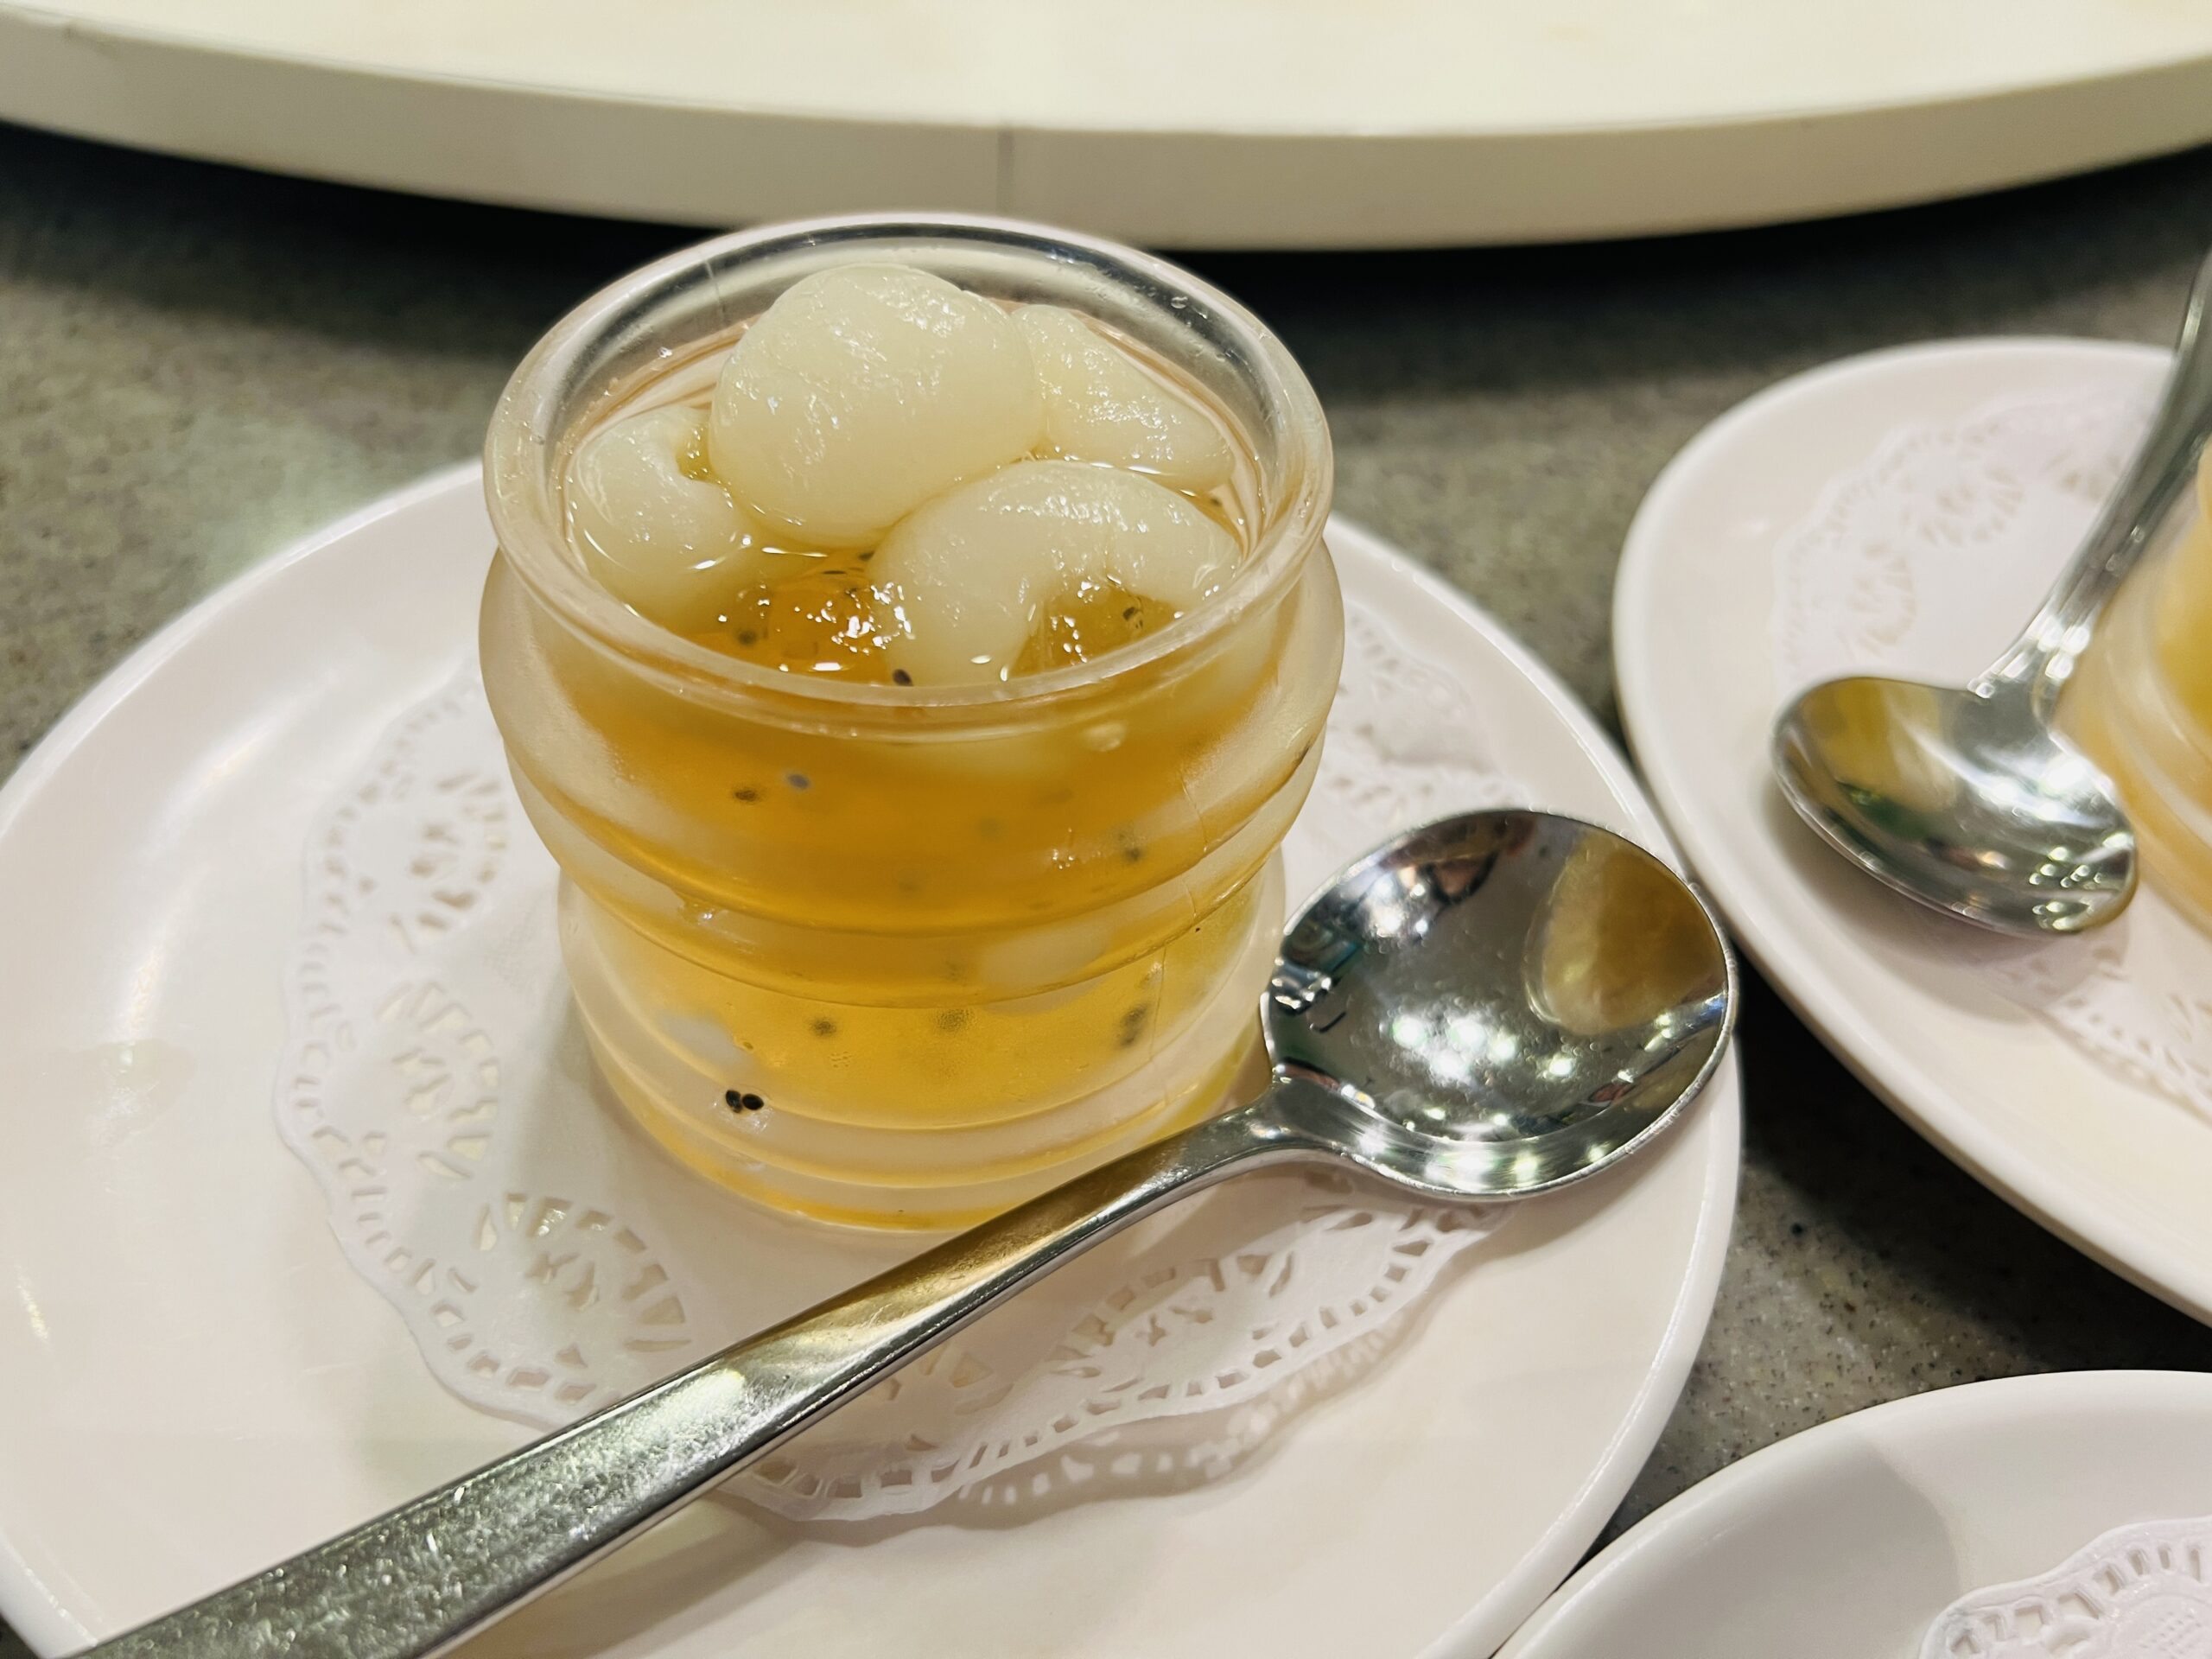 TongLok Teahouse - Chilled Lemongrass Jelly with Logan